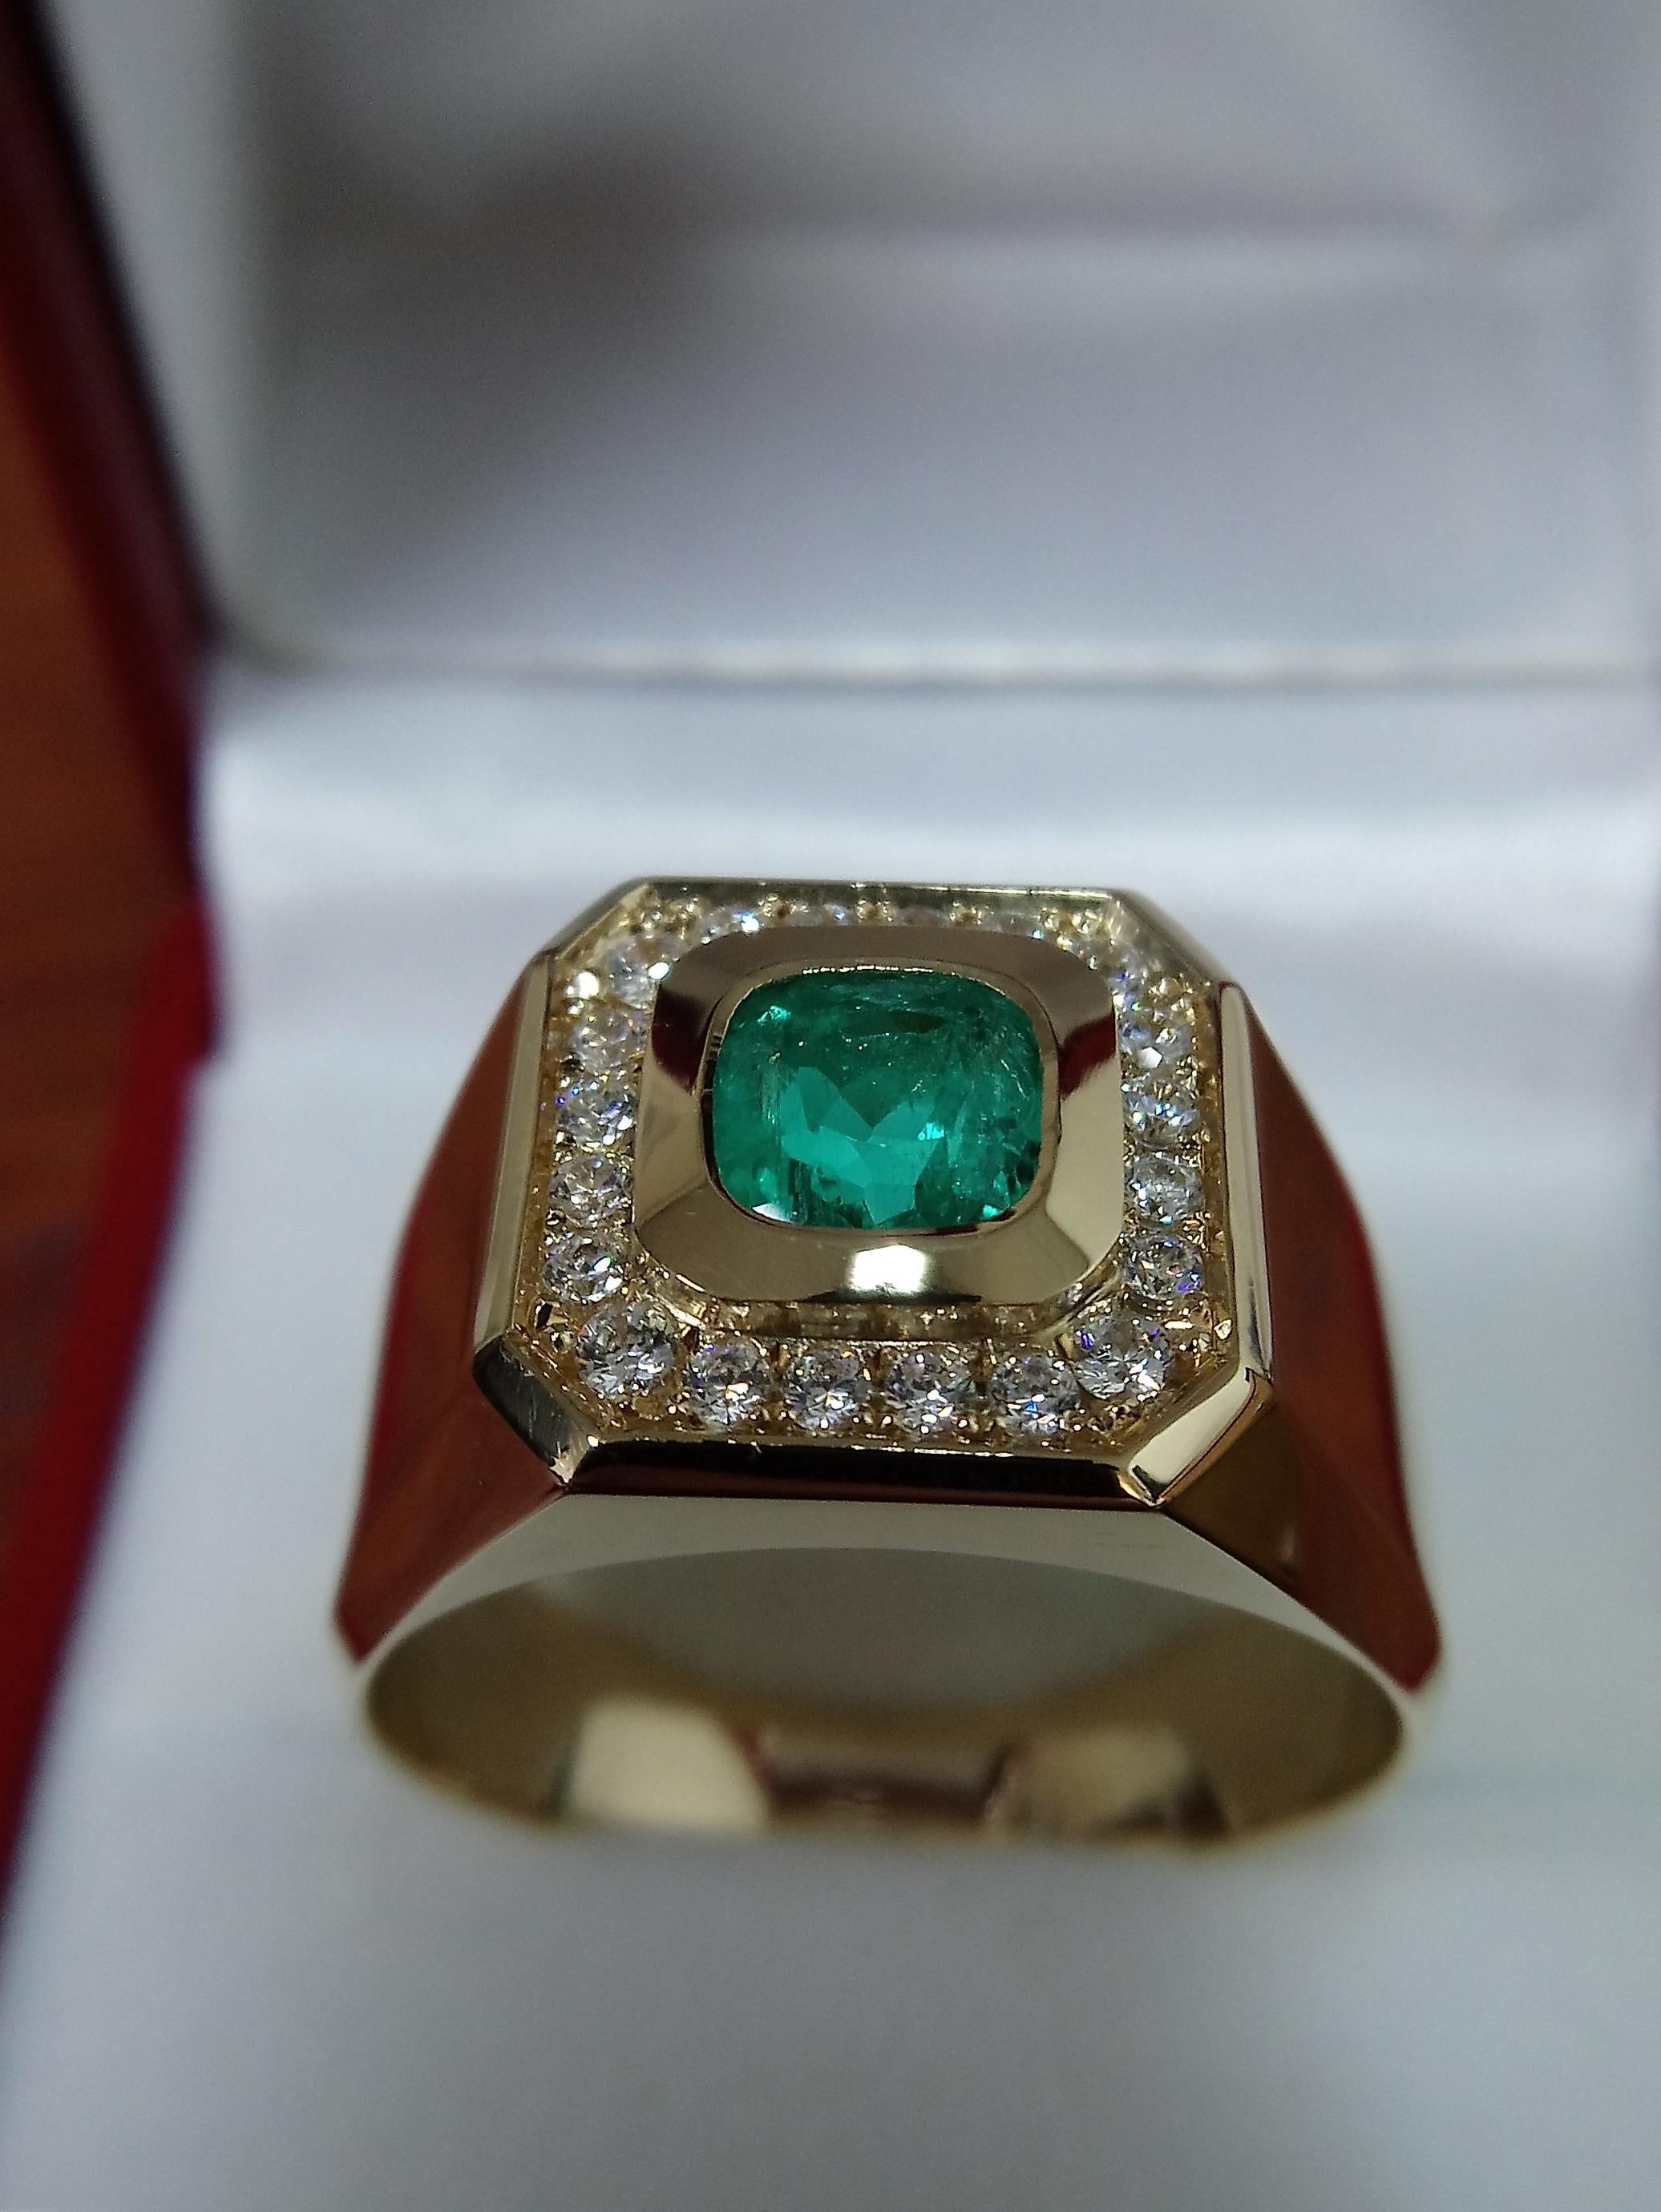 Comprising a 1.2 carat natural Colombian emerald centre stone, mounted in 18K yellow gold and surrounded by an elegant diamond halo consisting of 22 faceted diamonds, totalling 0.44 carats. Ideal as a unique engagement ring or cocktail ring.